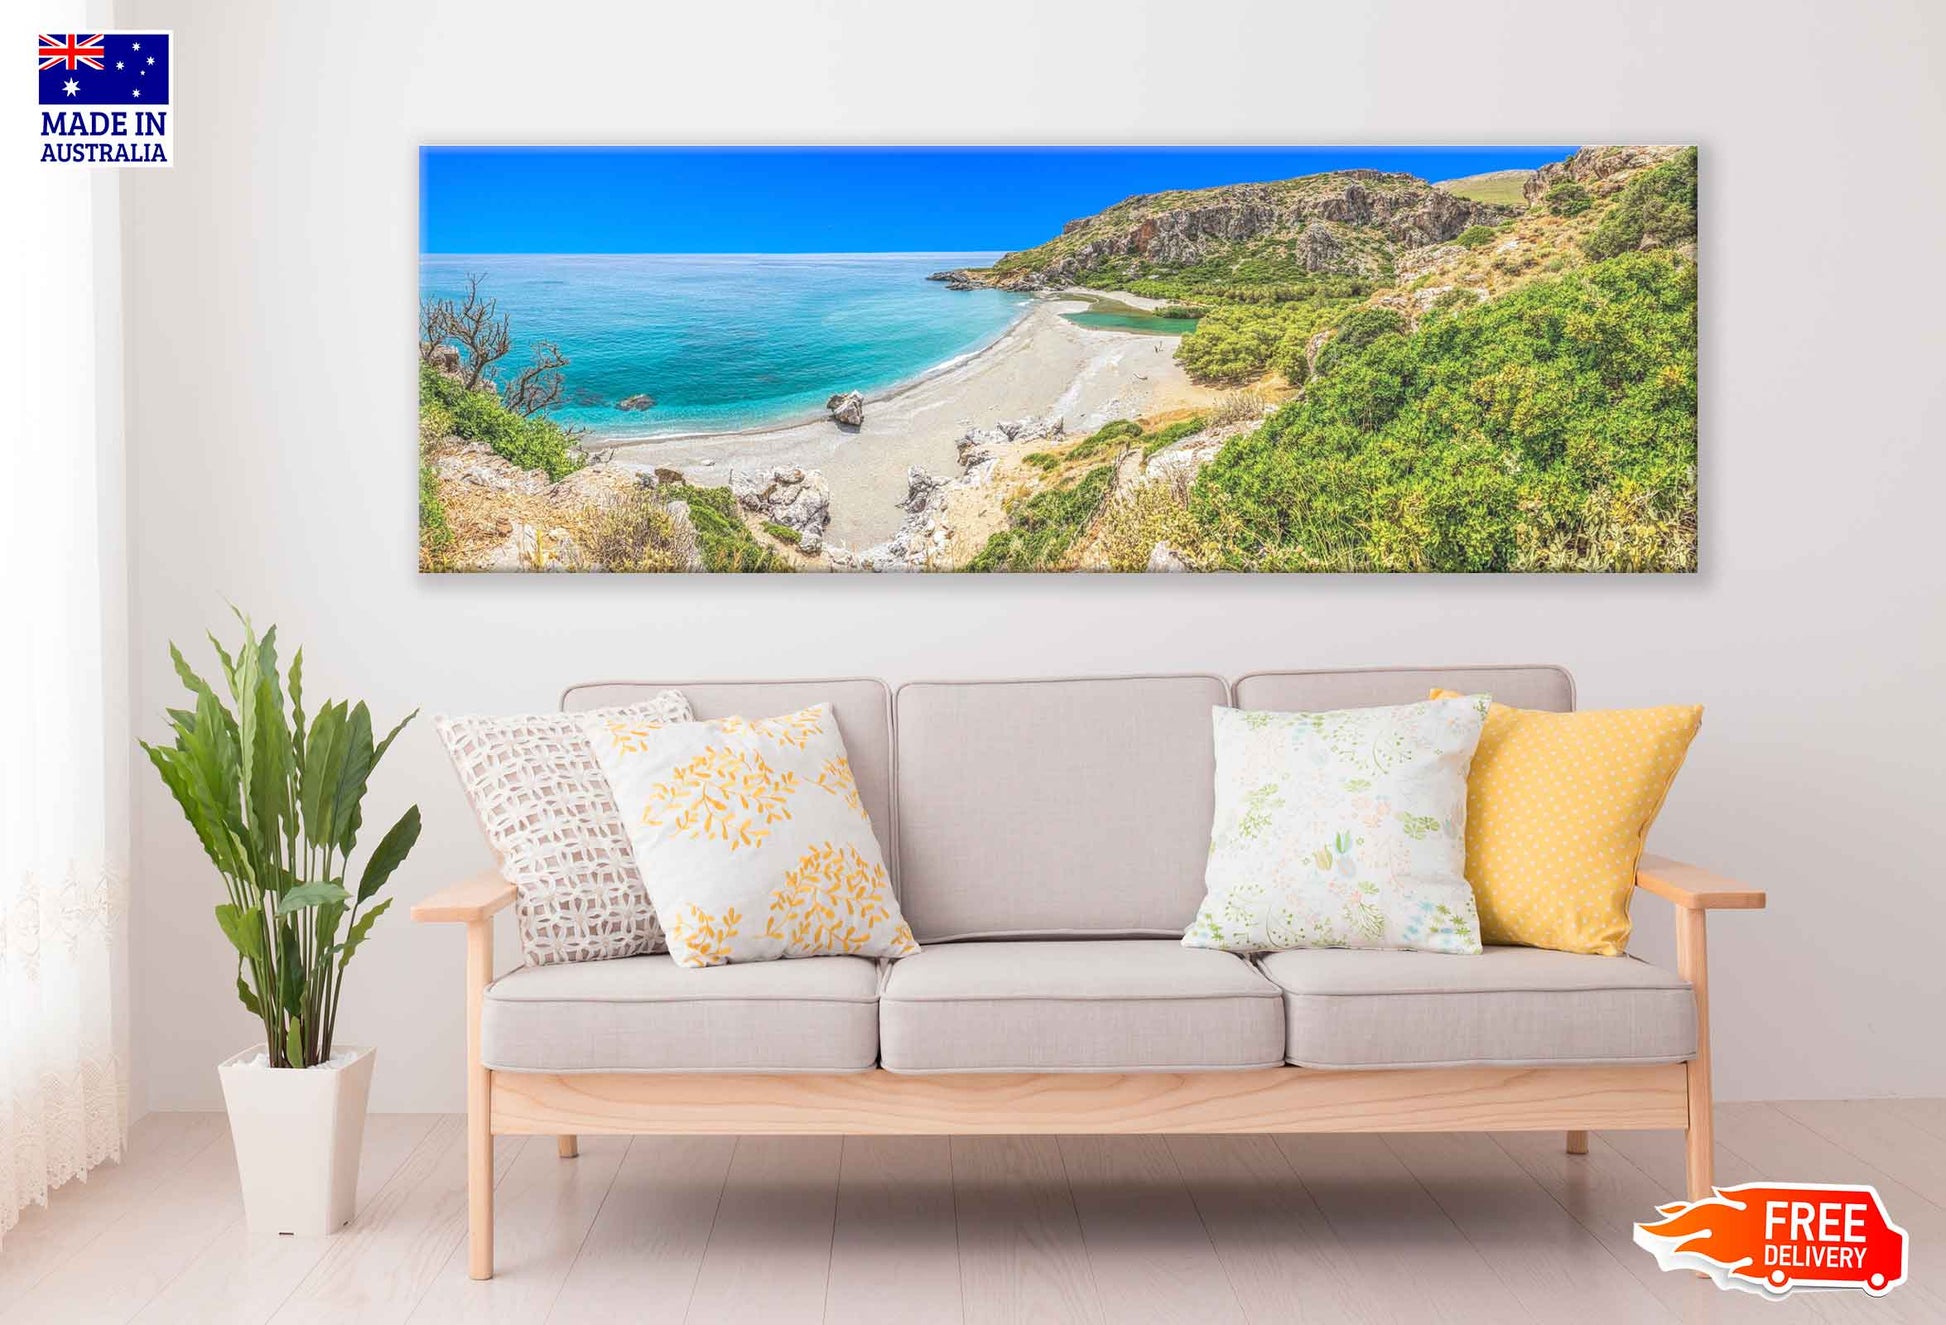 Panoramic Canvas Greek Island With Ocean View High Quality 100% Australian Made Wall Canvas Print Ready to Hang